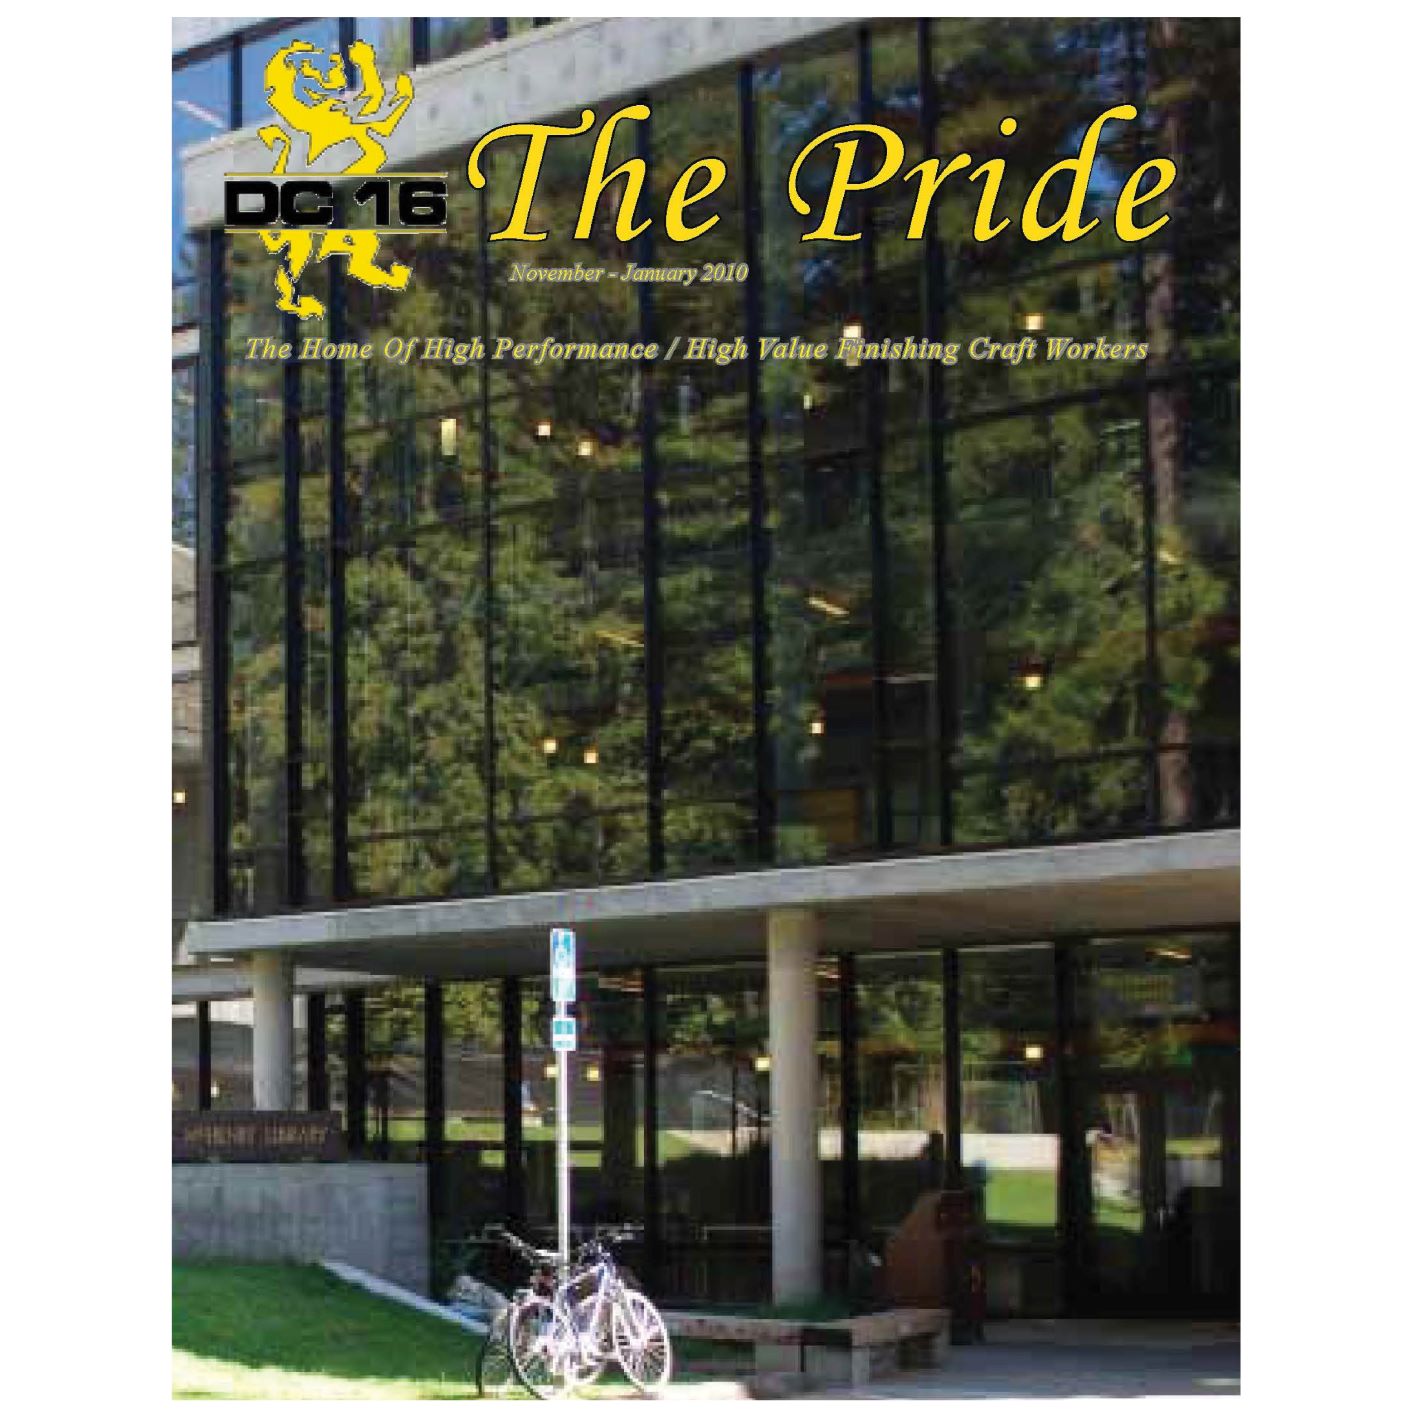 Image from the Gallery: The Pride November 2009 – January 2010